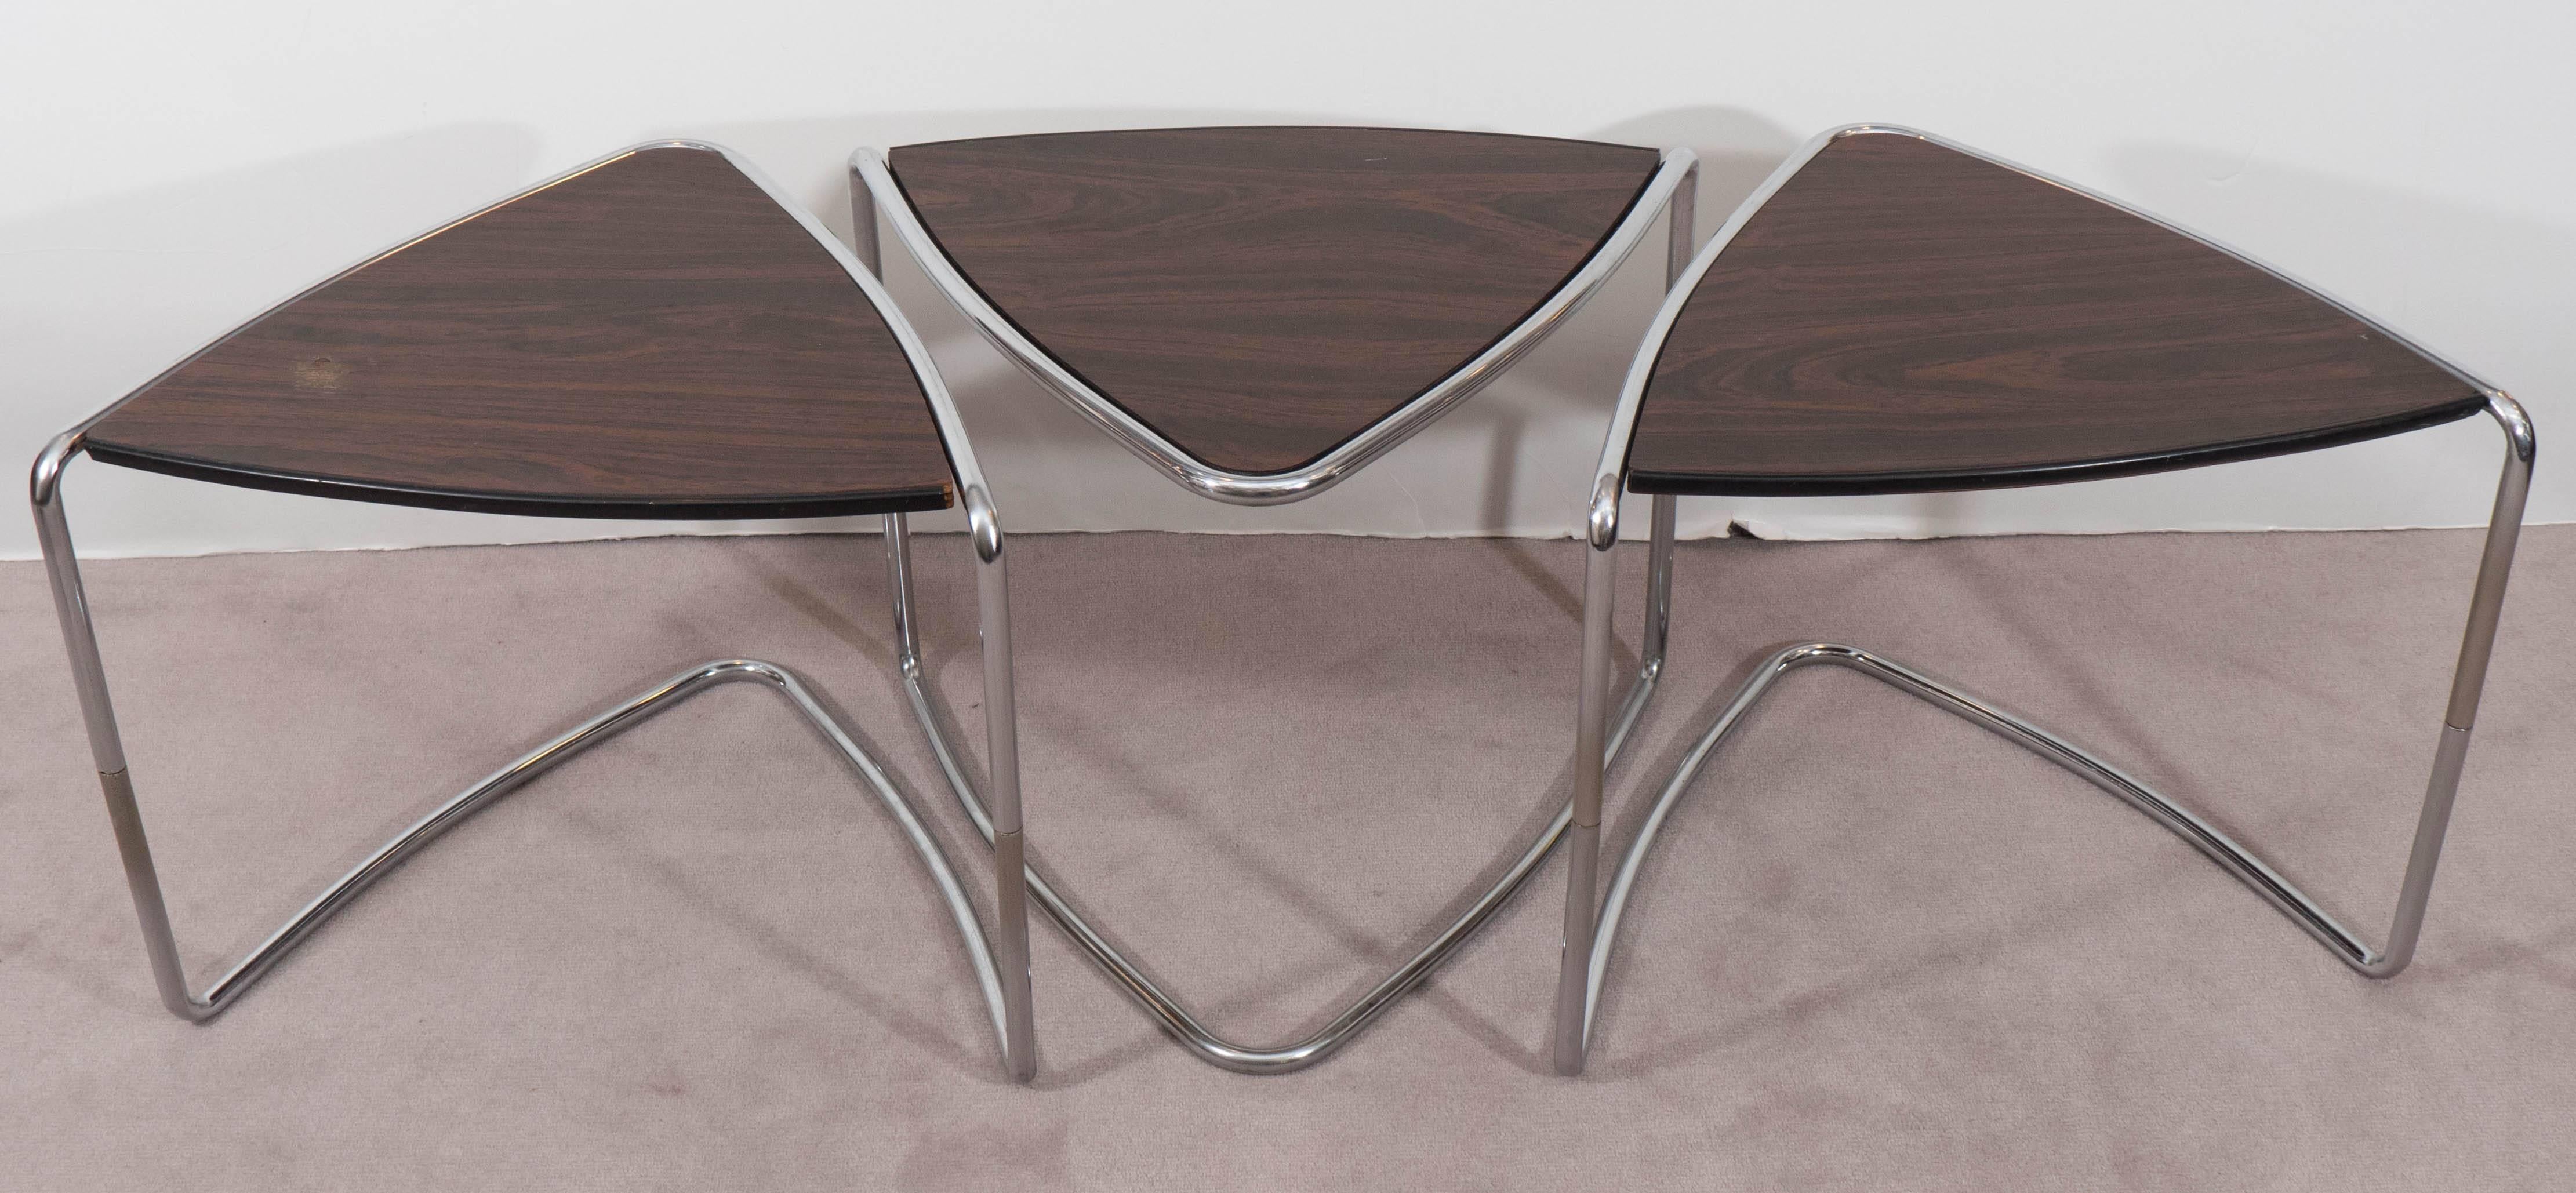 A set of three circa 1970s stacking tables, each with triangle shaped top in laminate wood, against polished chrome, tubular sled base. The tables remain in good vintage condition with age appropriate wear to chrome, including presence of pitting;